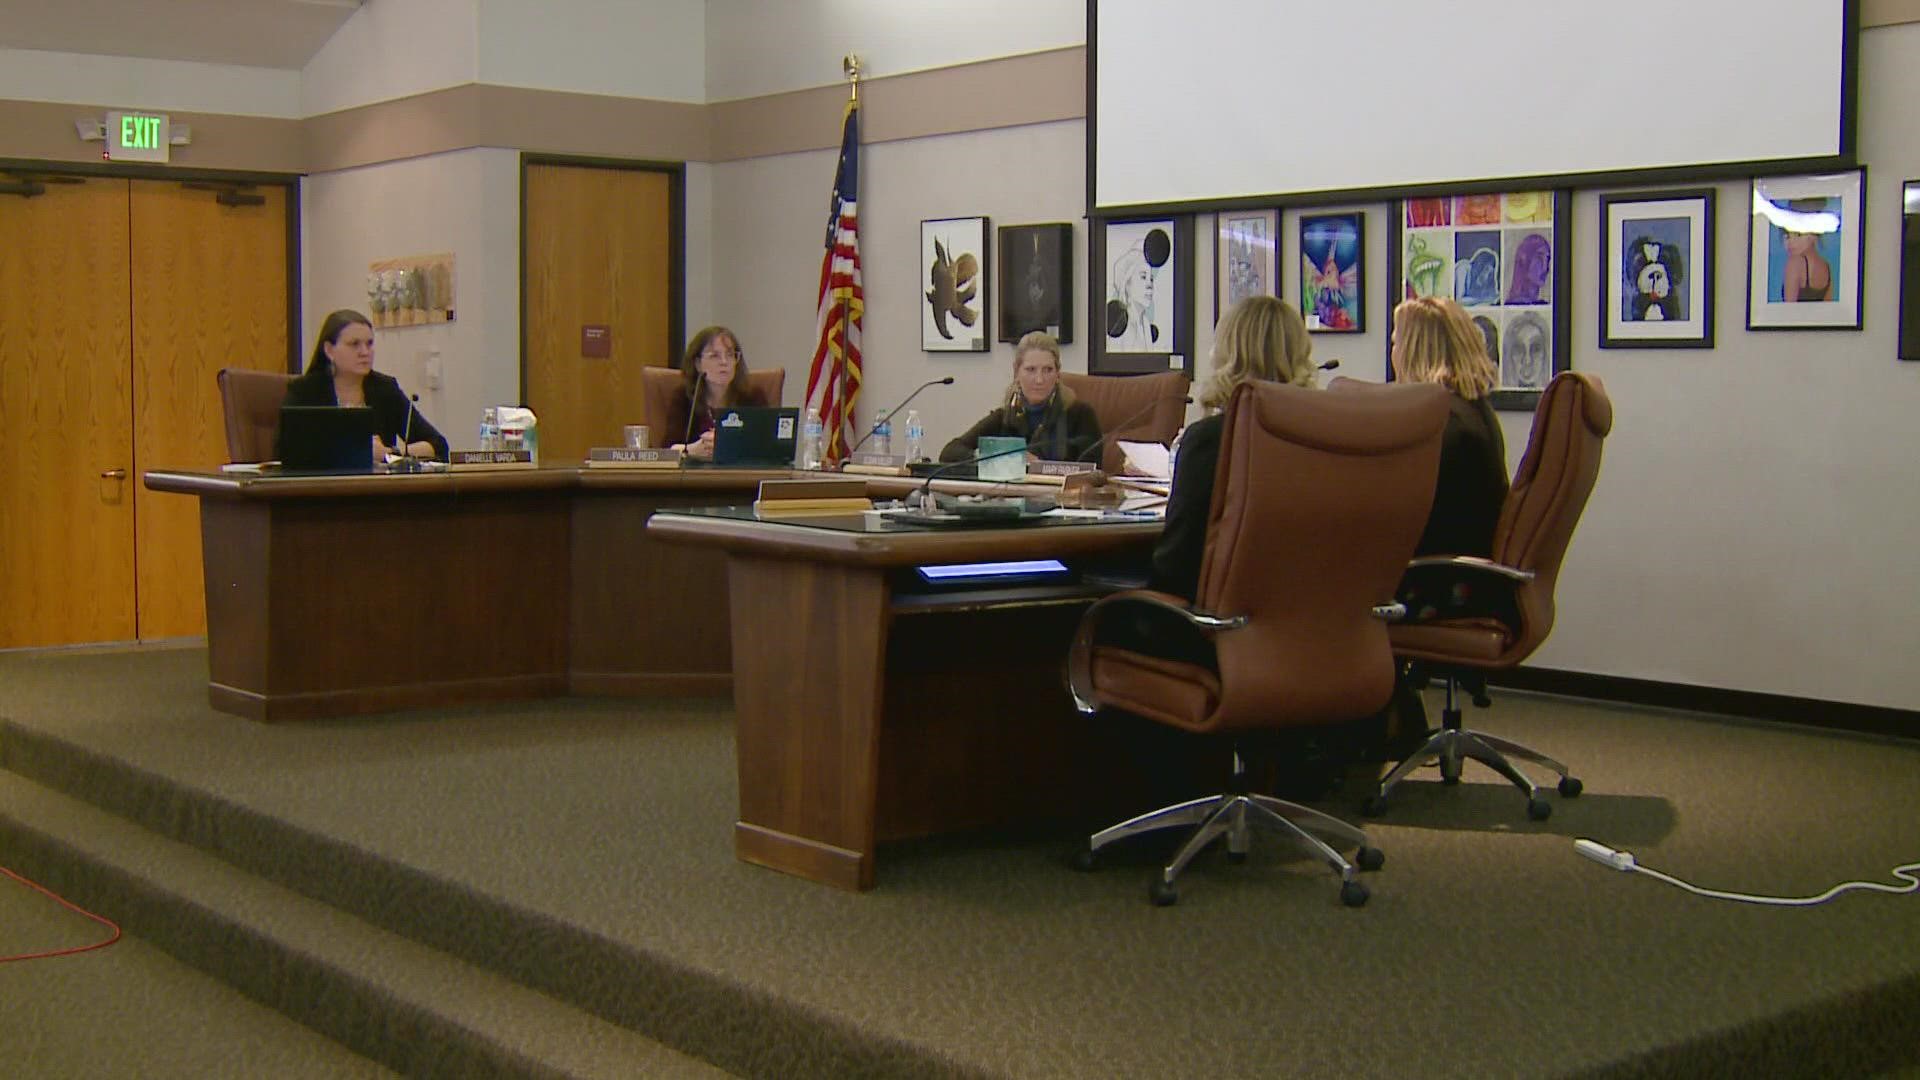 Jefferson County's board of education made the closures official Thursday. The move was expected, but still met with strong reactions.